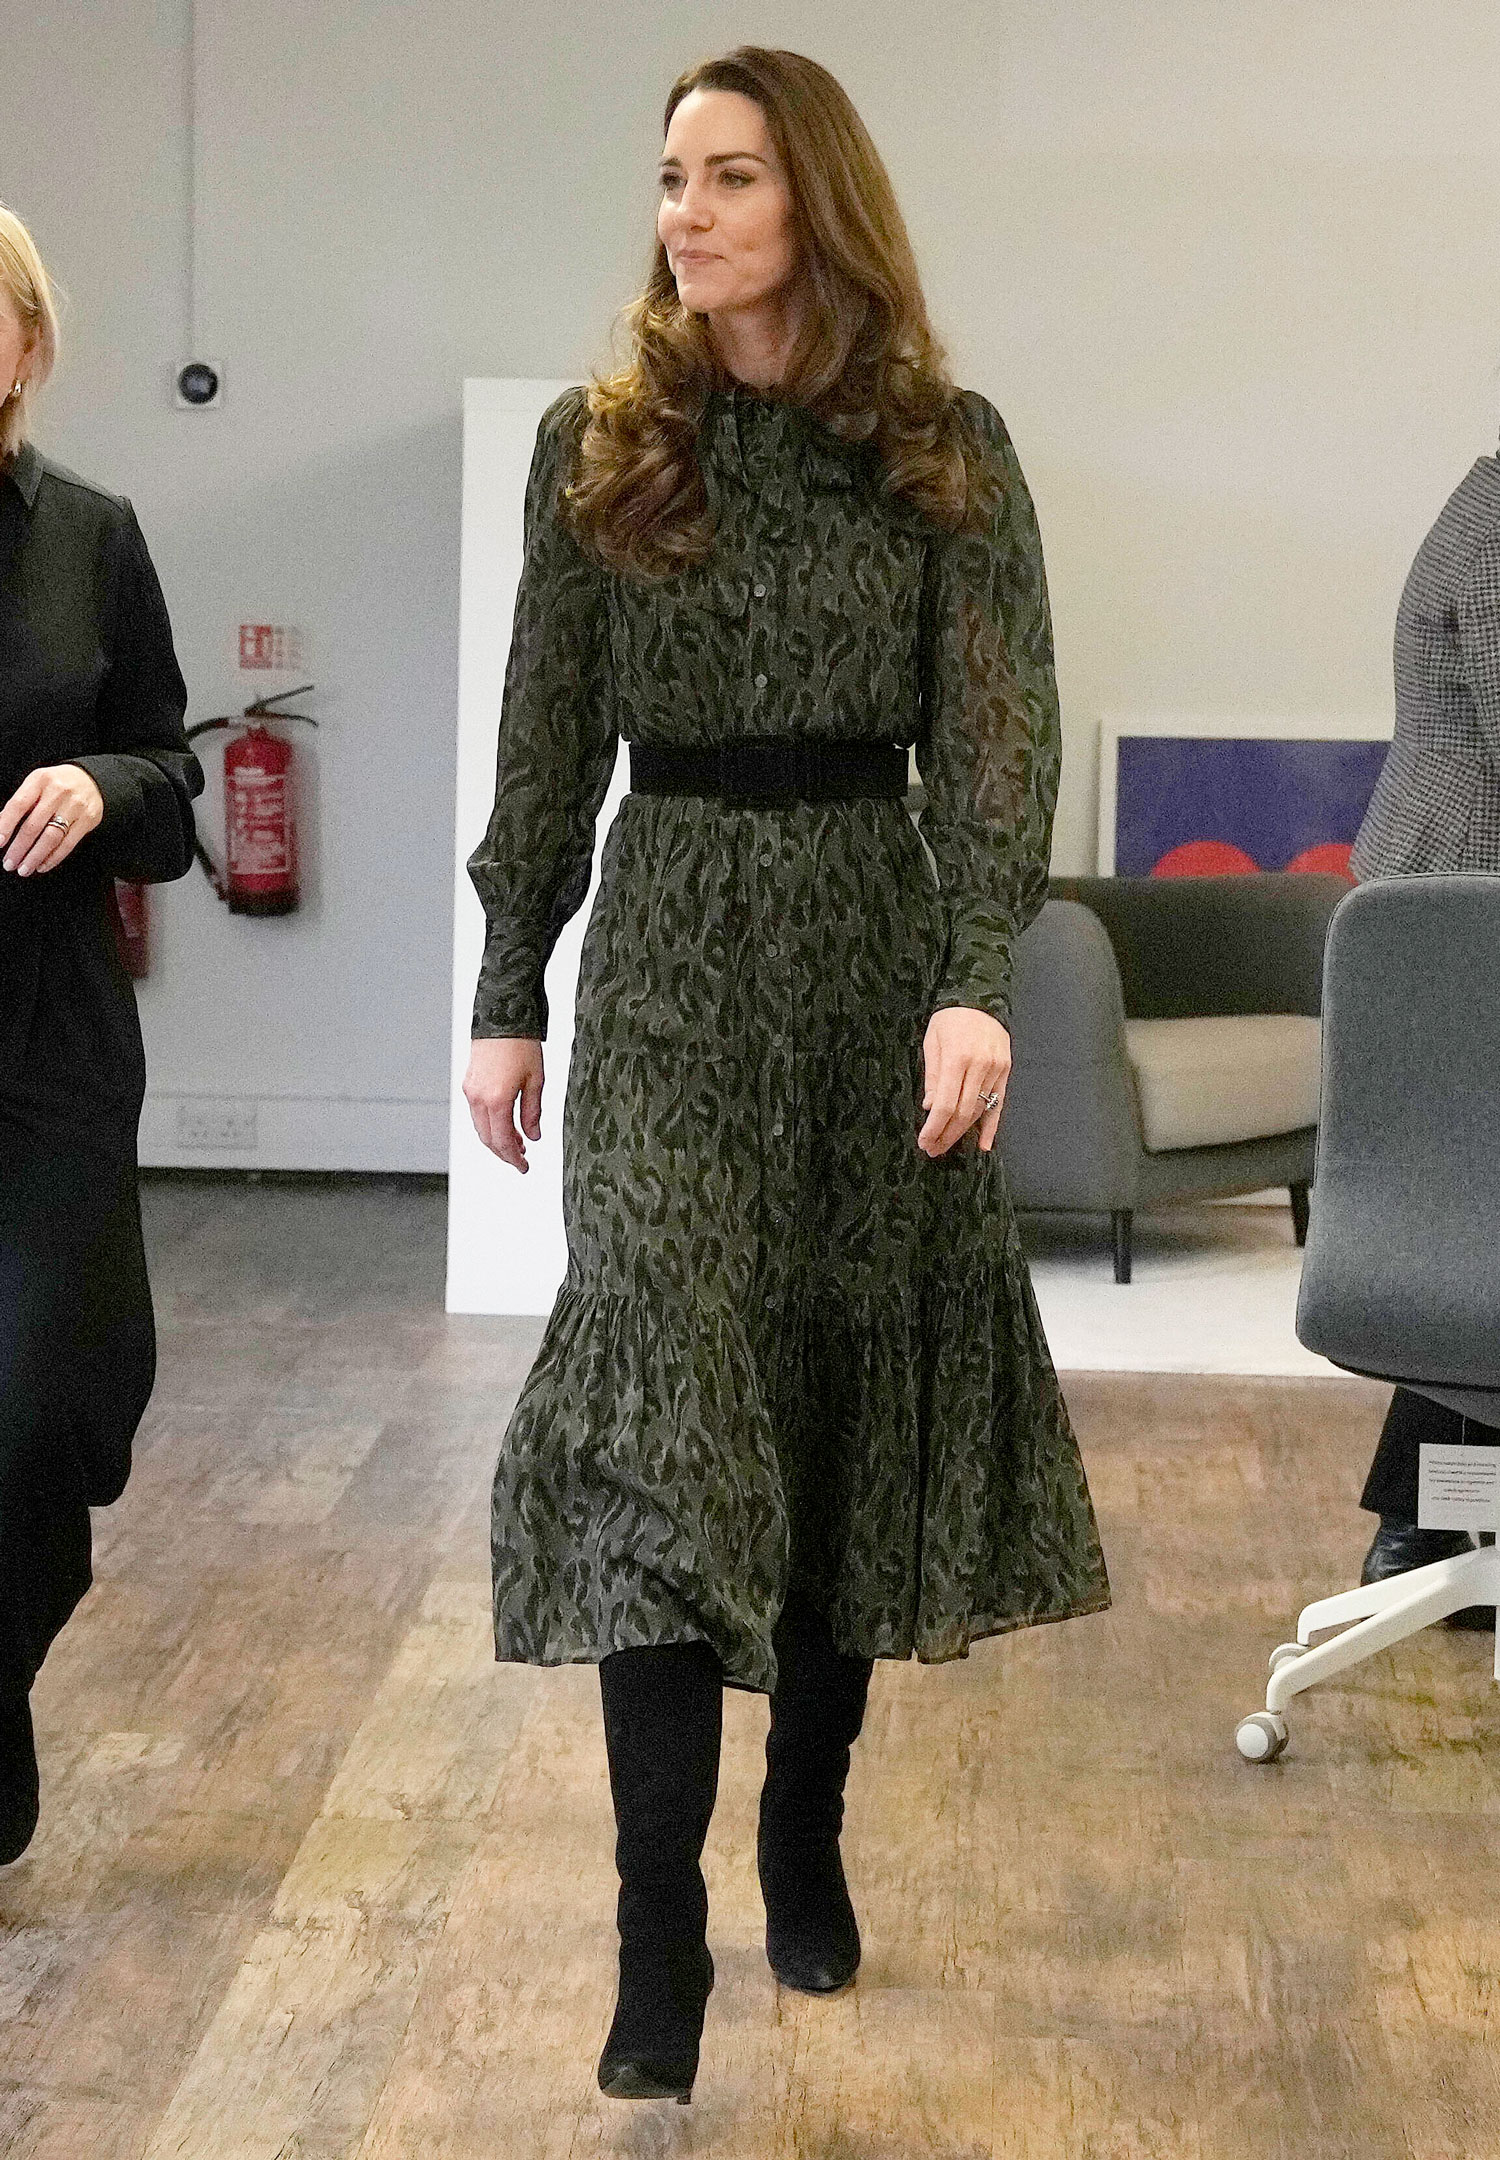 Kate Middleton's DressandBoot Combo Is a Fashion FailSafe Who What